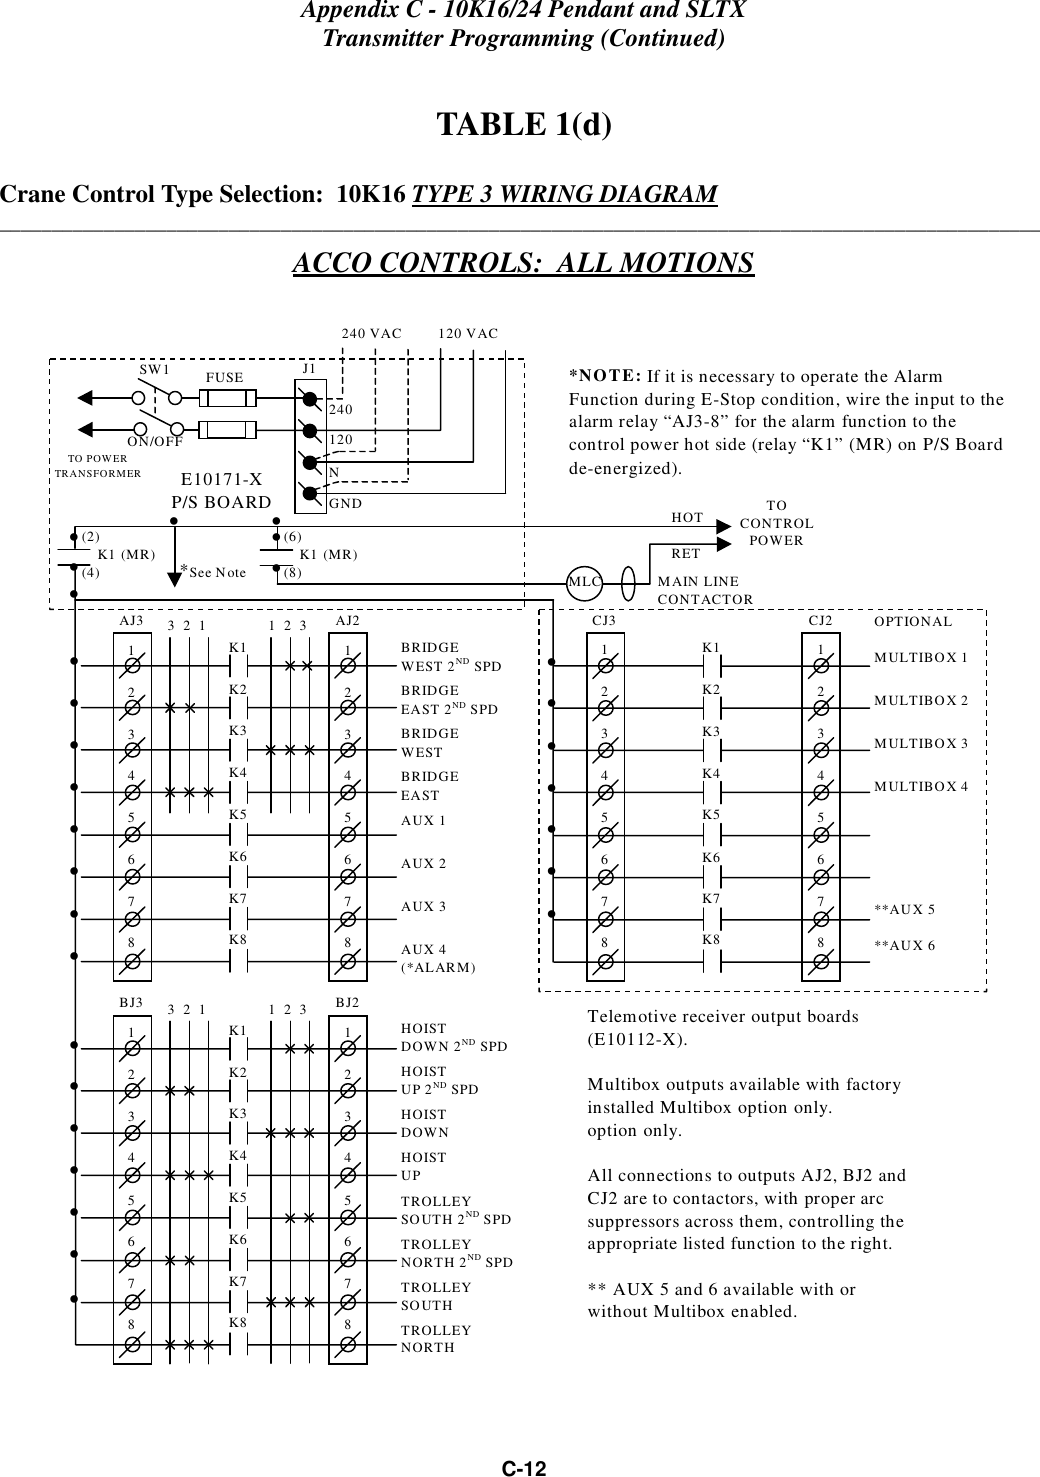 Appendix C - 10K16/24 Pendant and SLTXTransmitter Programming (Continued)C-12TABLE 1(d)Crane Control Type Selection:  10K16 TYPE 3 WIRING DIAGRAM____________________________________________________________________________________________________ACCO CONTROLS:  ALL MOTIONS CJ312345678CJ212345678K1K2K3K4K5K6K7K8OPTIONALMULTIBOX 1MULTIBOX 2MULTIBOX 3MULTIBOX 4**AUX 5**AUX 6• • • • • • • BJ312345678BJ212345678K1K2K3K4K5K6K7K83  2  1 1  2  3HOISTDOWN 2ND SPDHOISTUP 2ND SPDHOISTDOWNHOISTUPTROLLEYSOUTH 2ND SPDTROLLEYNORTH 2ND SPDTROLLEYSOUTHTROLLEYNORTH• • • • • • AJ312345678AJ212345678K1K2K3K4K5K6K7K83  2  1 1  2  3BRIDGEWEST 2ND SPDBRIDGEEAST 2ND SPDBRIDGEWESTBRIDGEEASTAUX 1AUX 2AUX 3AUX 4(*ALARM)• • • • • • • • *NOTE: If it is necessary to operate the AlarmFunction during E-Stop condition, wire the input to thealarm relay “AJ3-8” for the alarm function to thecontrol power hot side (relay “K1” (MR) on P/S Boardde-energized).Telemotive receiver output boards(E10112-X).Multibox outputs available with factoryinstalled Multibox option only.option only.All connections to outputs AJ2, BJ2 andCJ2 are to contactors, with proper arcsuppressors across them, controlling theappropriate listed function to the right.** AUX 5 and 6 available with orwithout Multibox enabled.240 VAC         120 VACSW1ON/OFFTO POWERTRANSFORMER E10171-XP/S BOARDMAIN LINECONTACTORTOCONTROLPOWERMLCHOTRET(2)    K1   (MR)(4)• • • *See Note• 240120FUSE J1NGND(6)    K1   (MR)(8)• • • • 